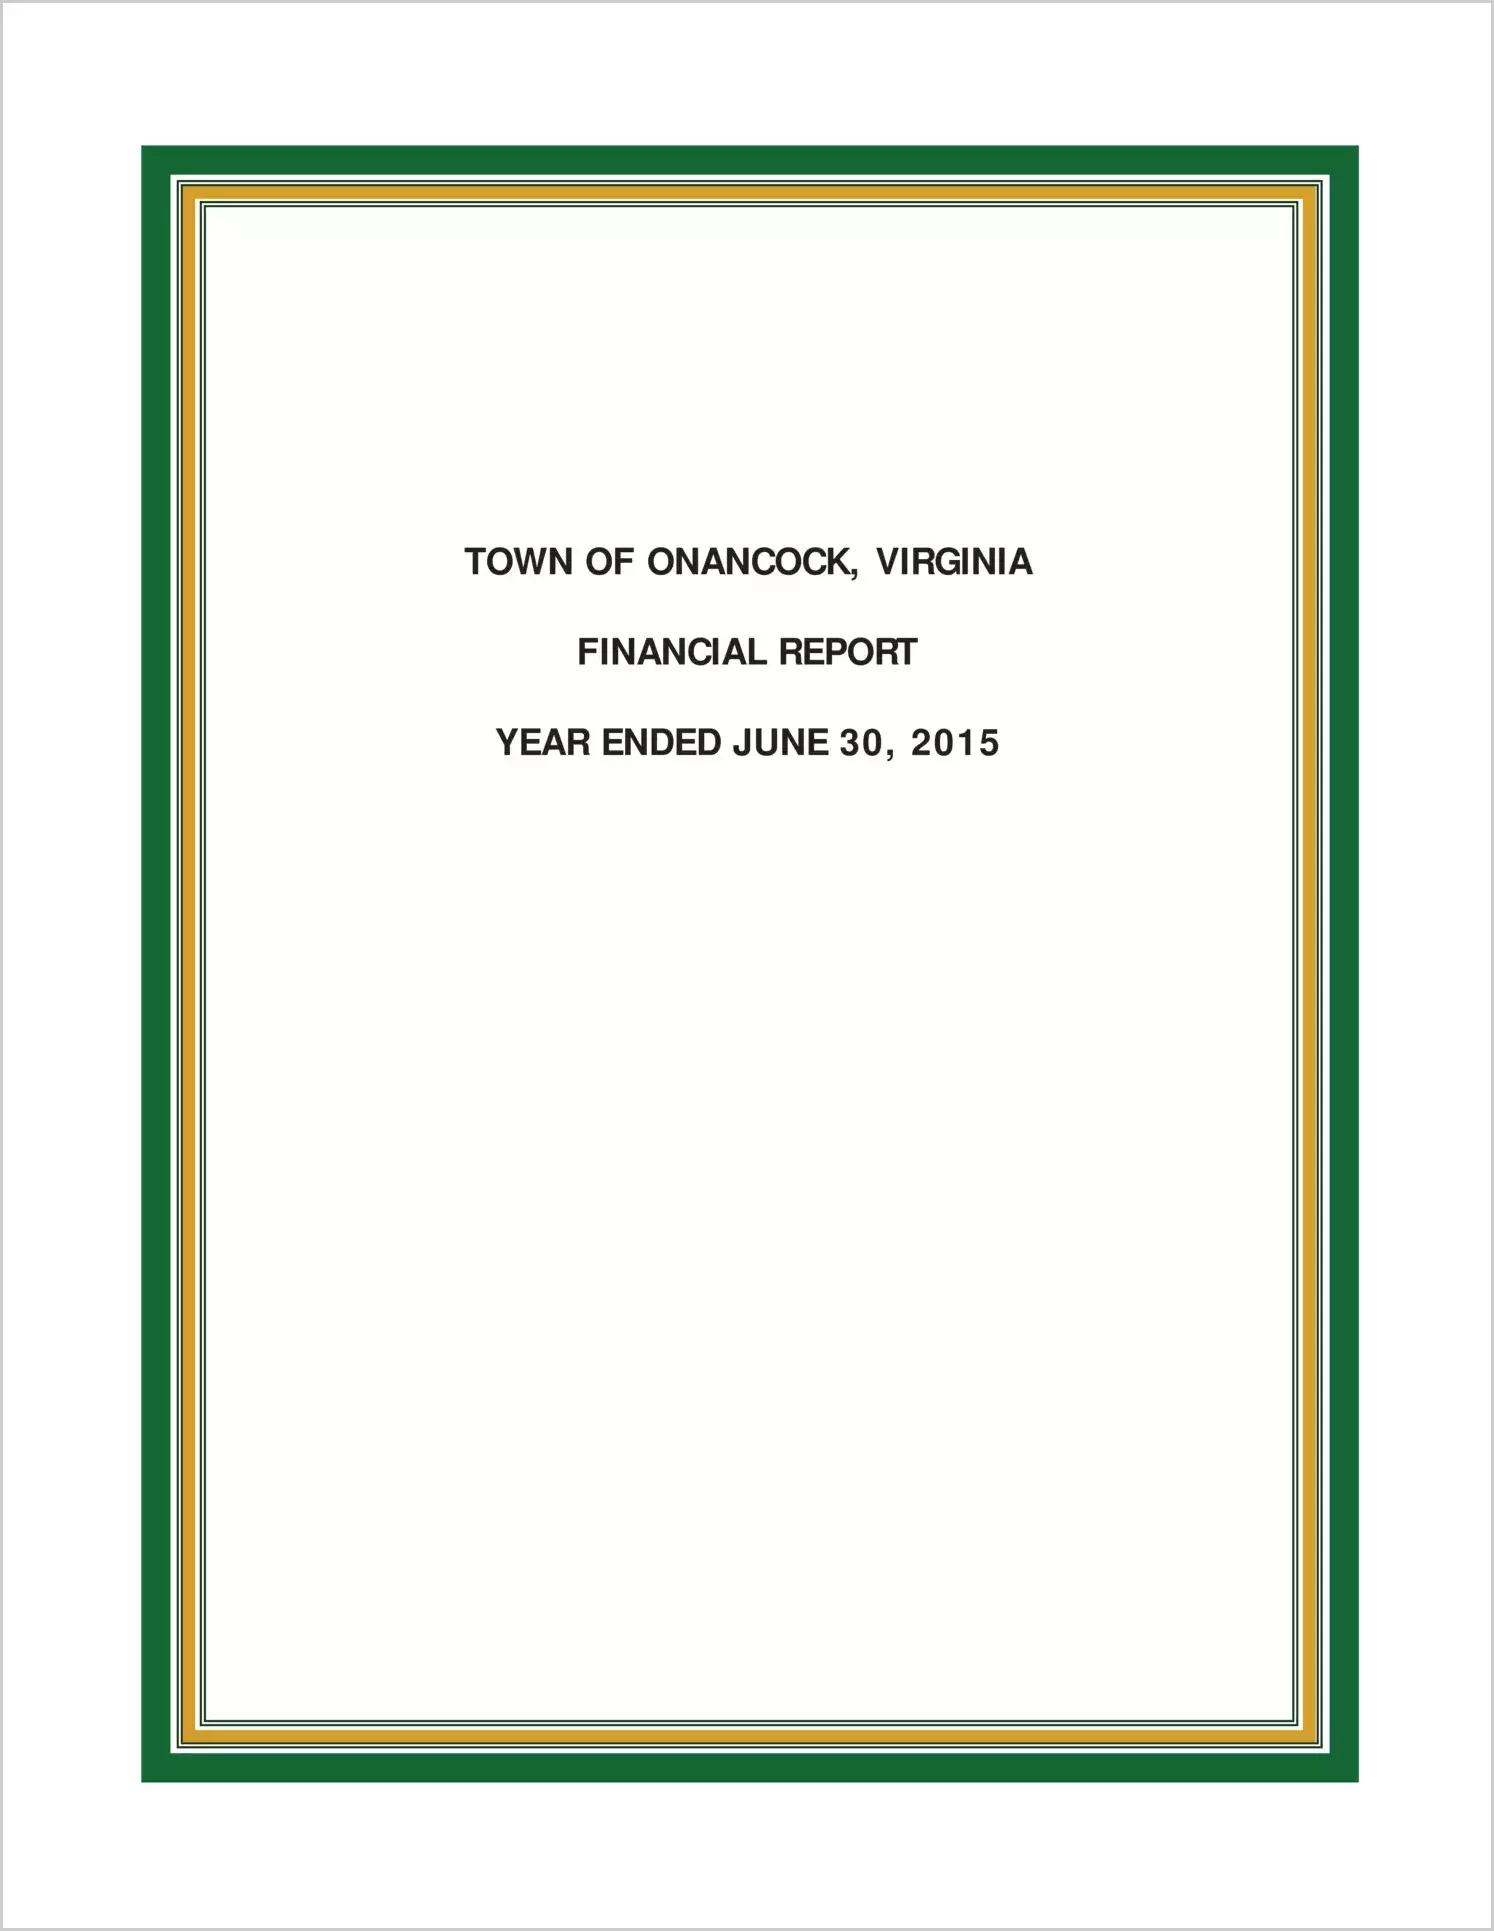 2015 Annual Financial Report for Town of Onancock